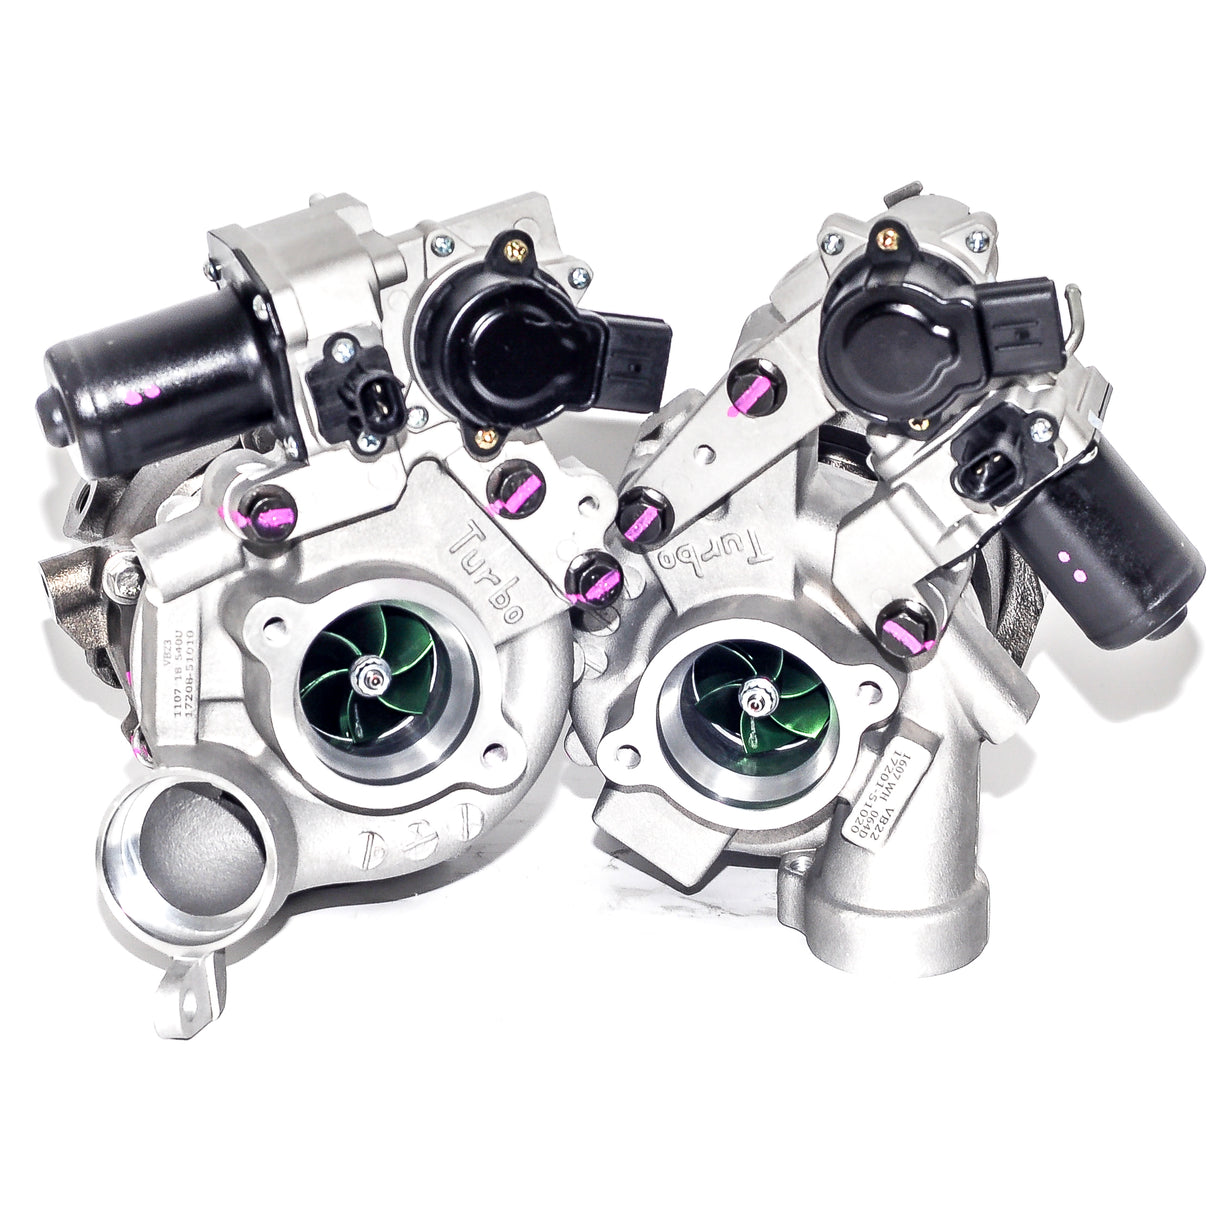 𝐒𝐓𝐀𝐆𝐄 𝟐 CCT Upgrade Hi-Flow Turbo charger To Suit Toyota Landcruiser 200 Series Twin turbo